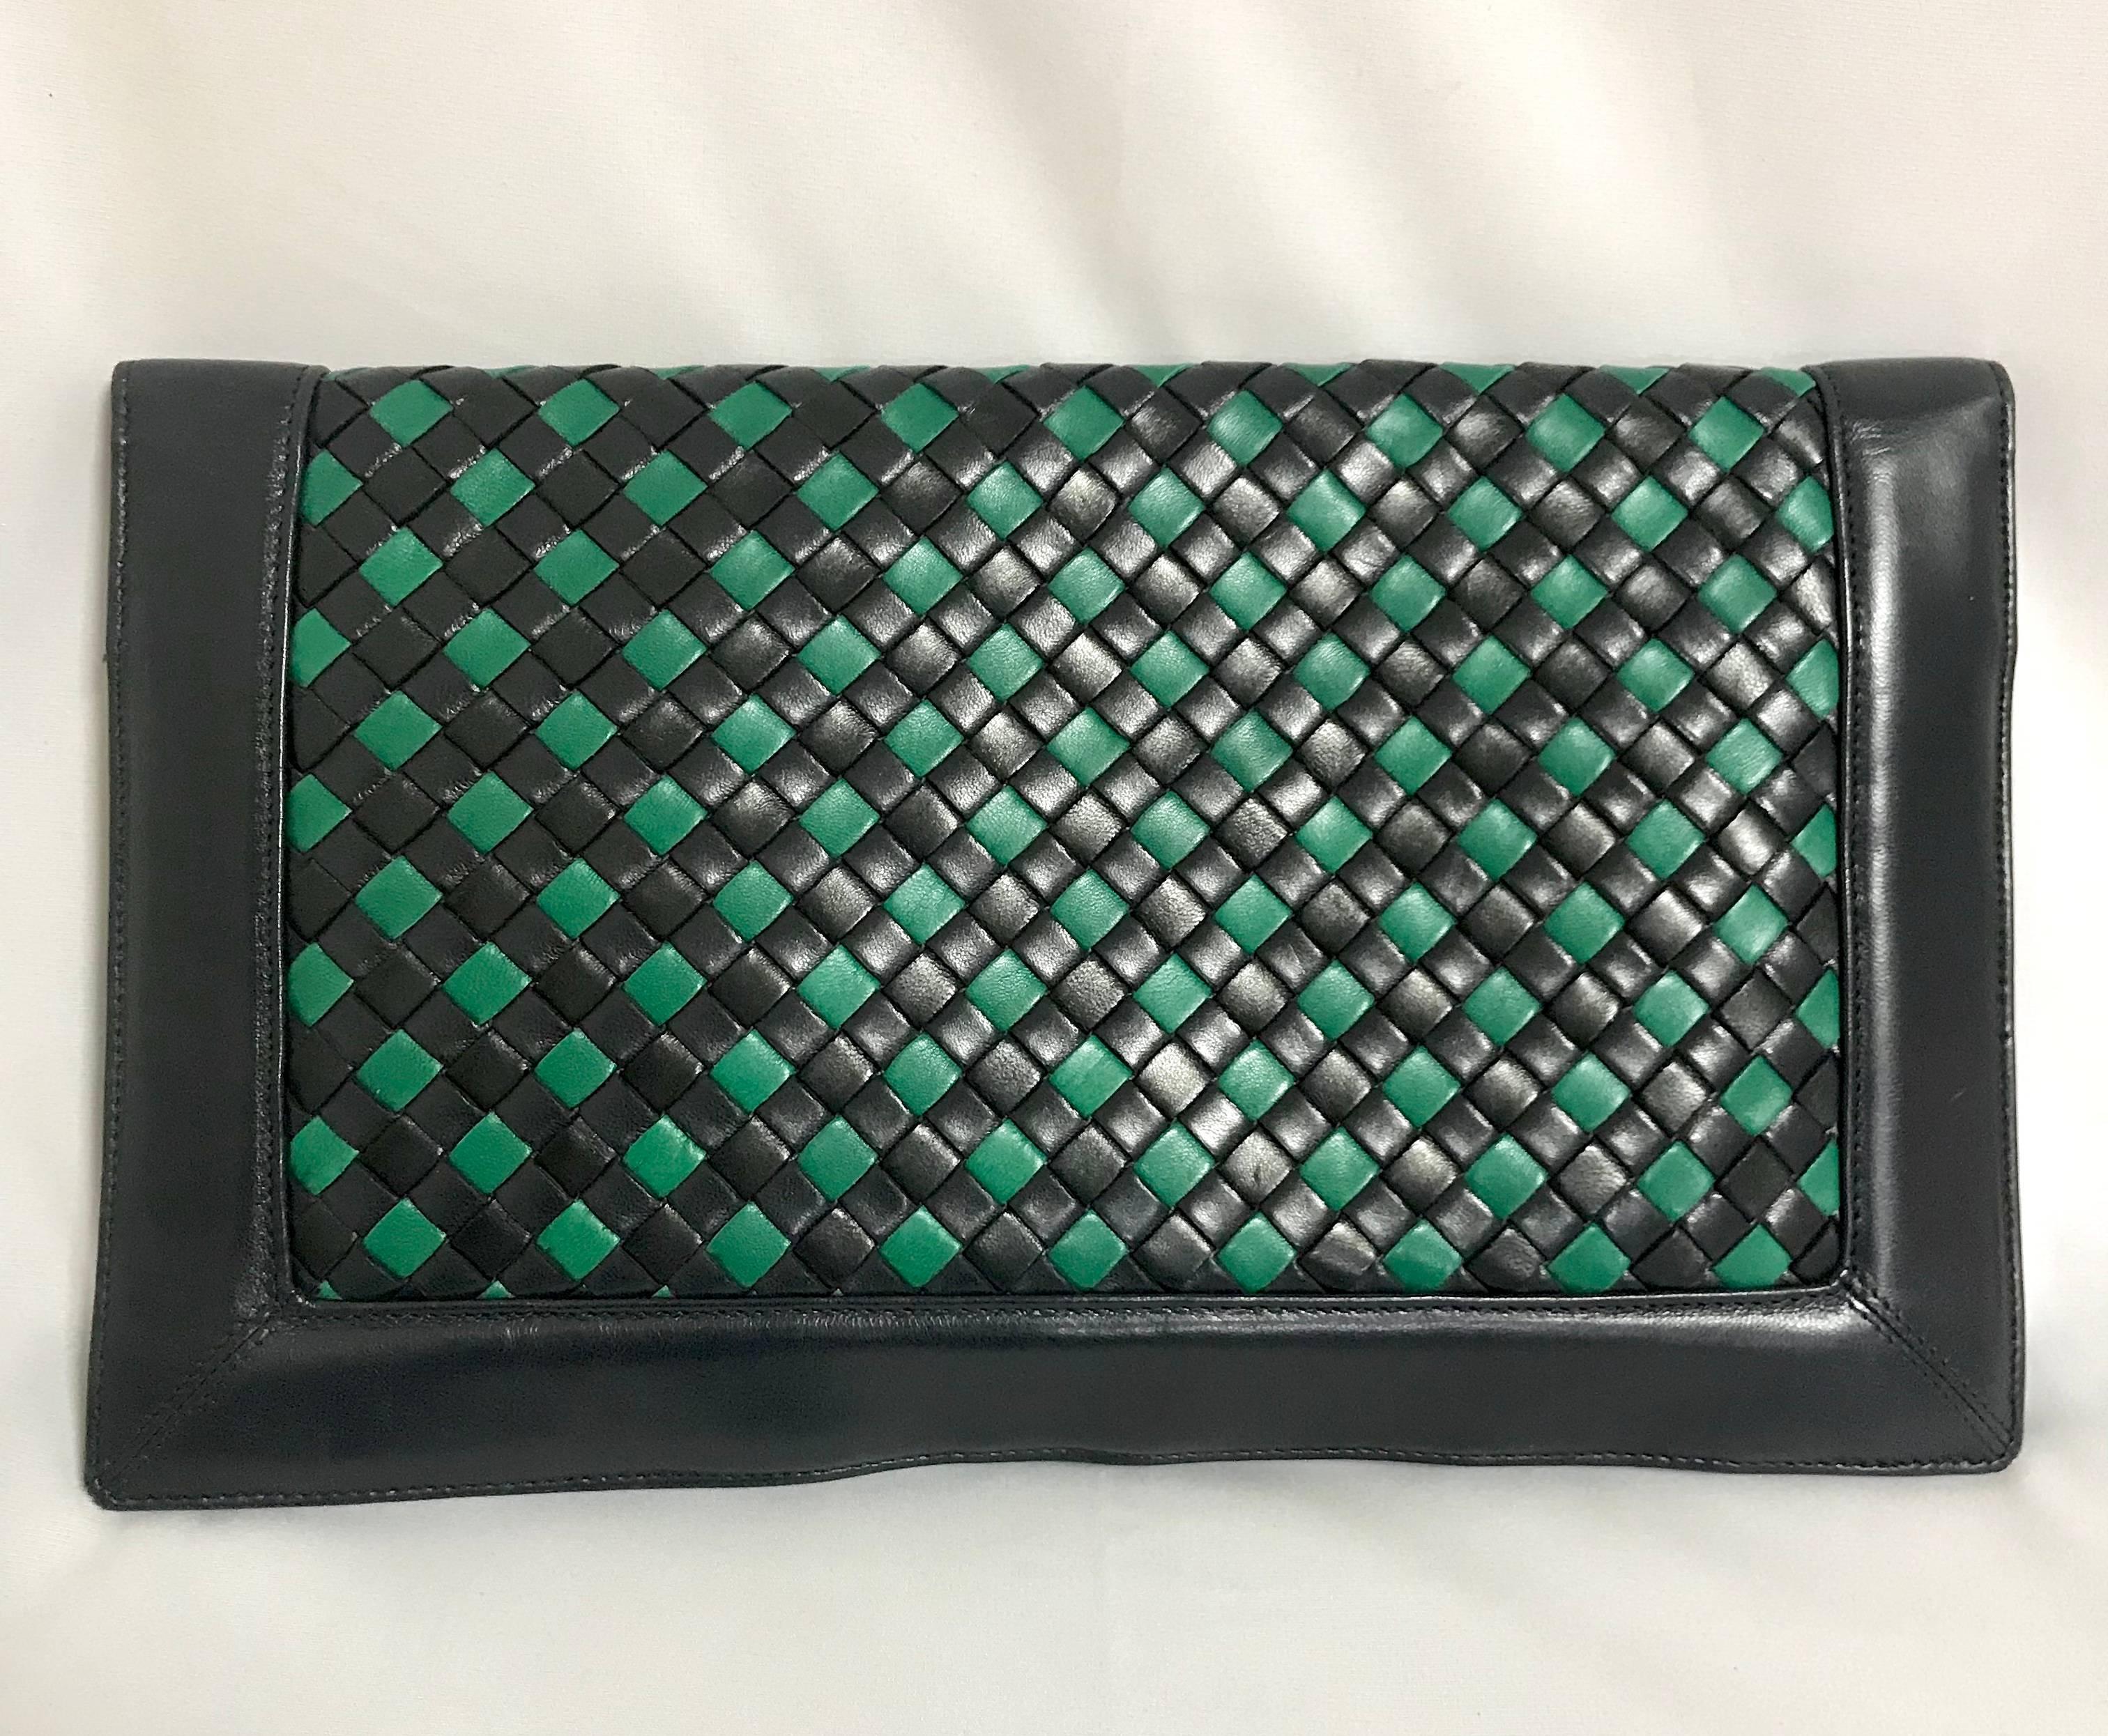 1990s. Vintage Bottega Veneta intrecciato navy and green woven lamb leather large clutch bag, purse. Unisex.

Bottega Veneta's iconic style  intrecciato purse from early 90s.

If you are vintage Bottega collector or lover, then don't miss this rare